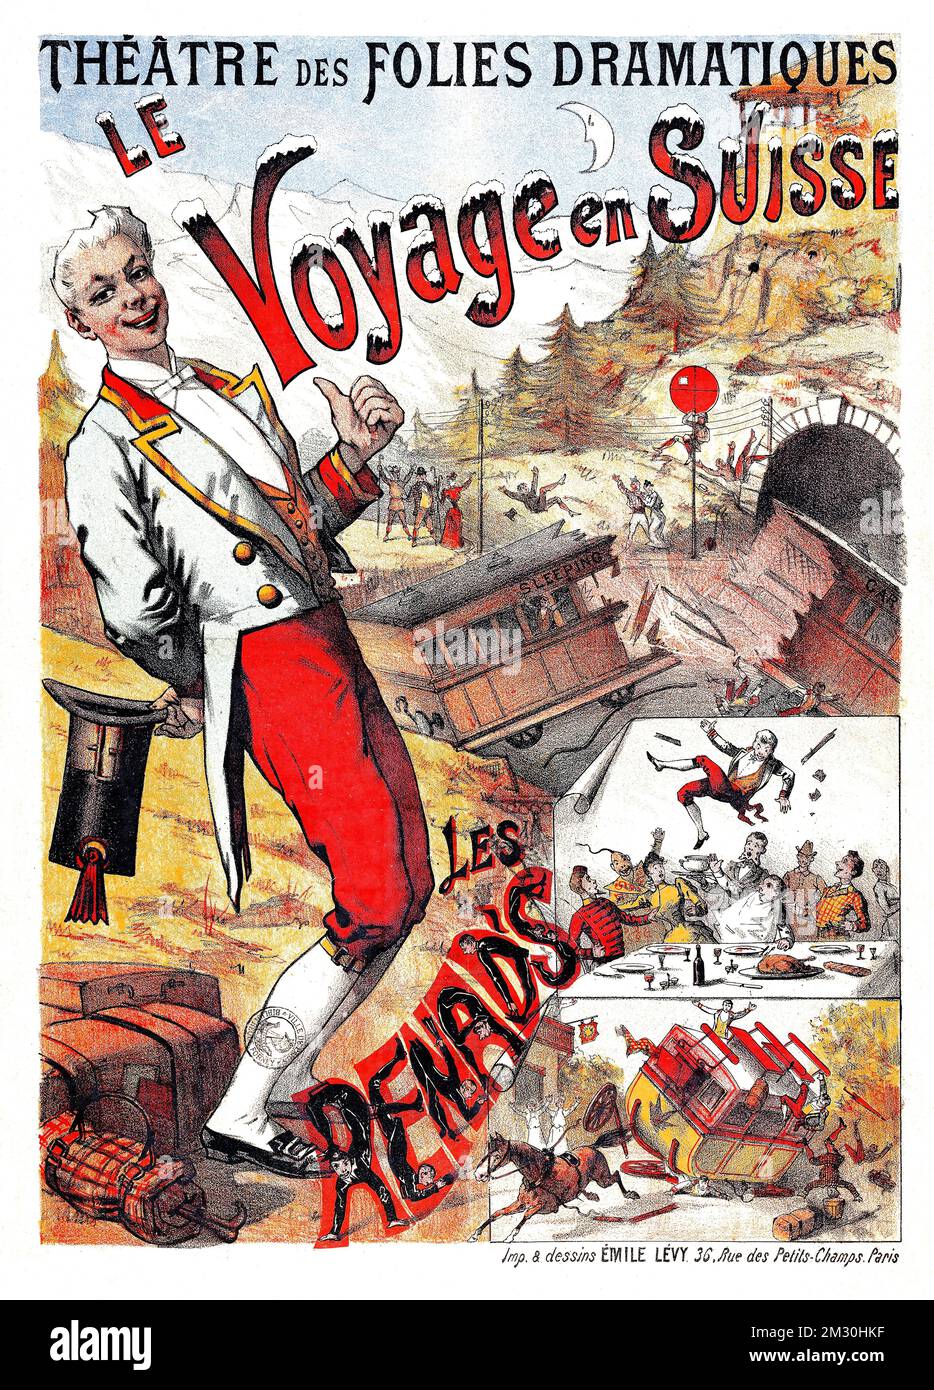 Old theatre poster - Le Voyage en Suisse - Theater of Dramatic Folies. Travel to Switzerland. Les Renad's - vintage poster by Emile Levy, 1892 Stock Photo